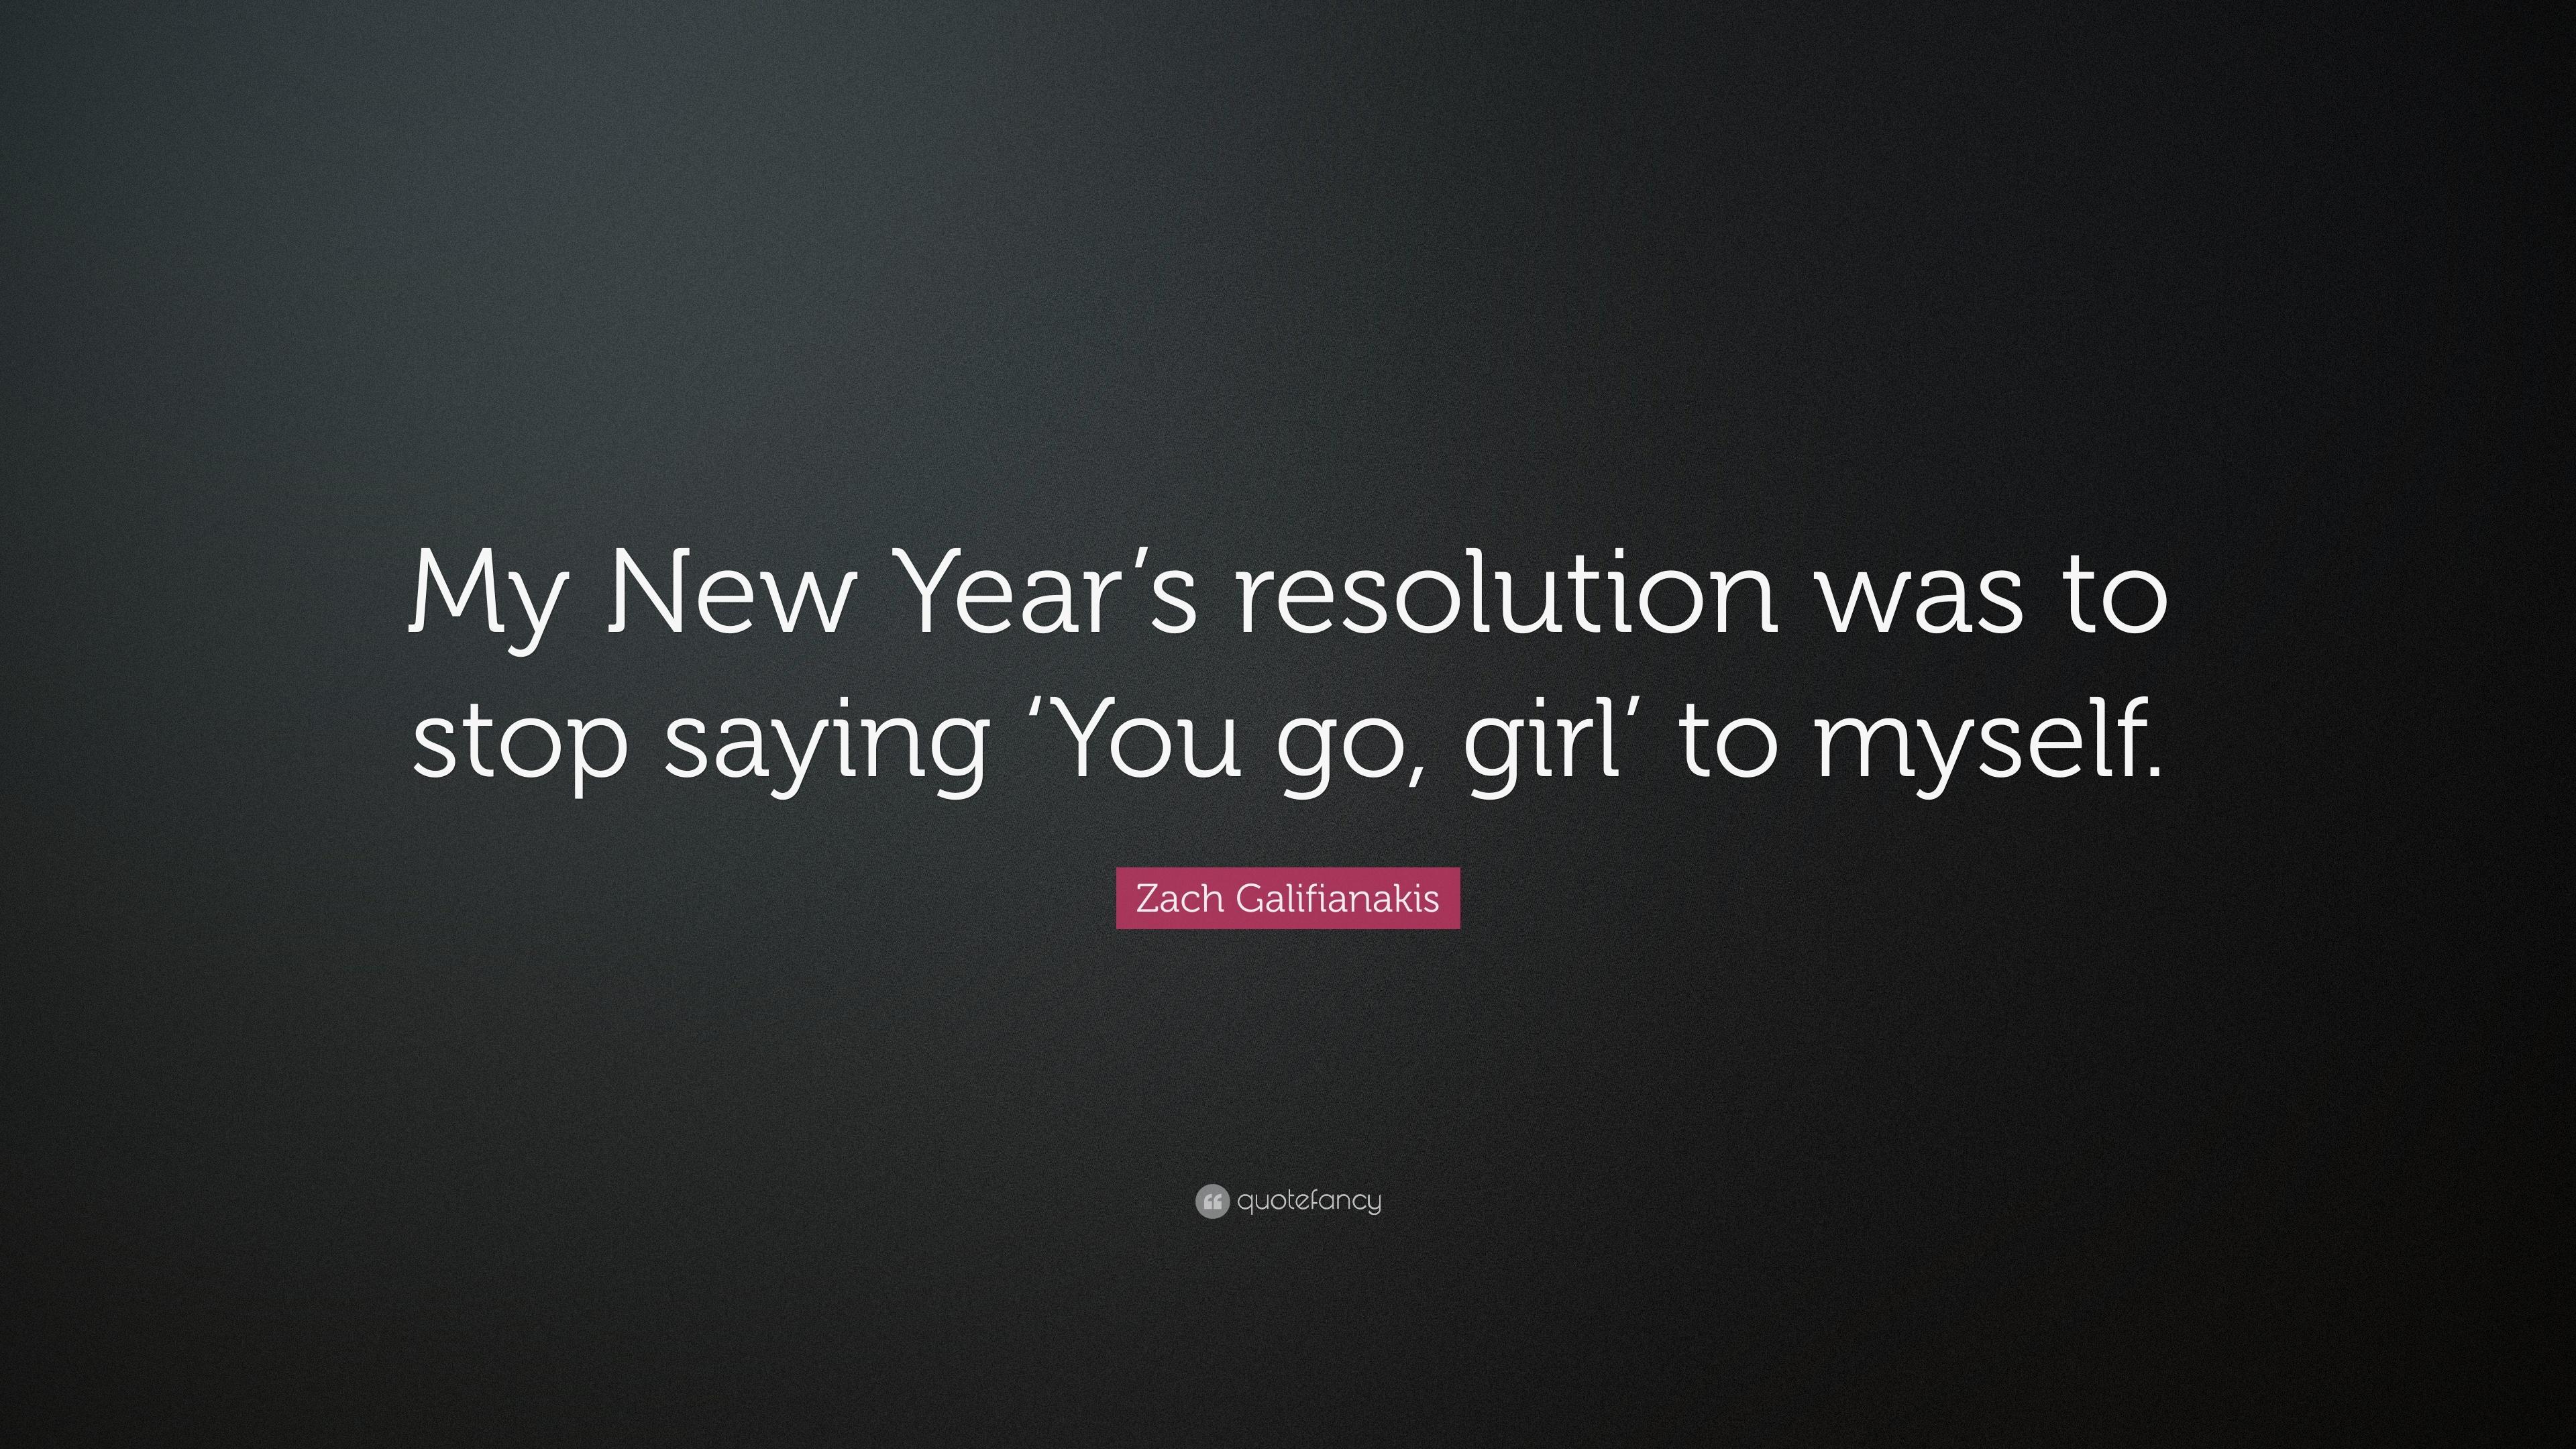 Zach Galifianakis Quote: “My New Year's resolution was to